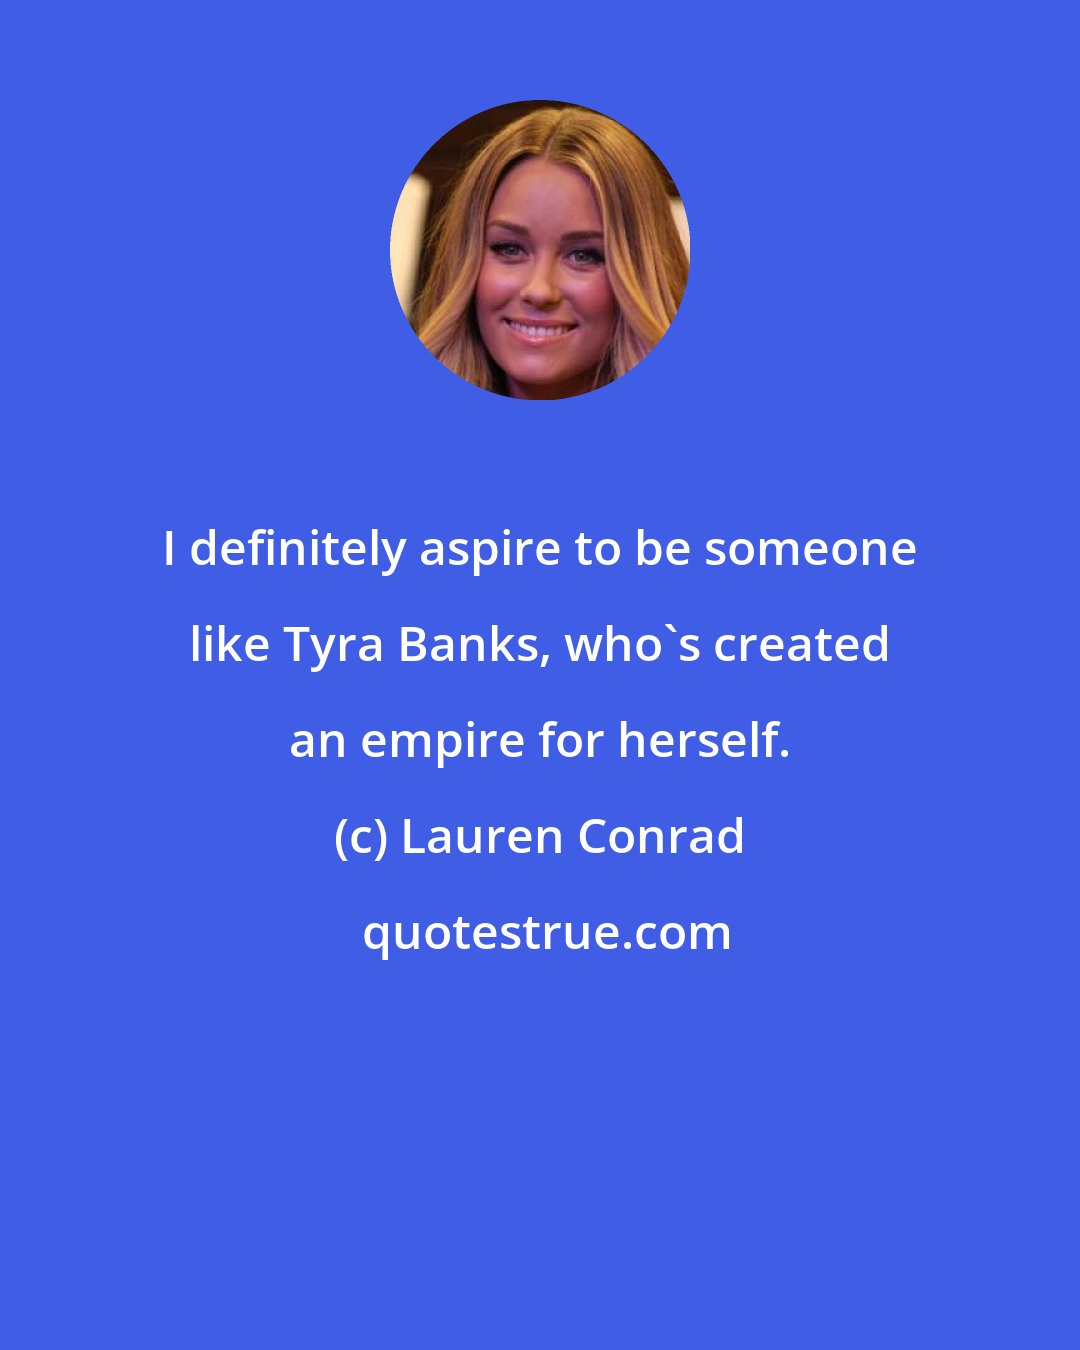 Lauren Conrad: I definitely aspire to be someone like Tyra Banks, who's created an empire for herself.